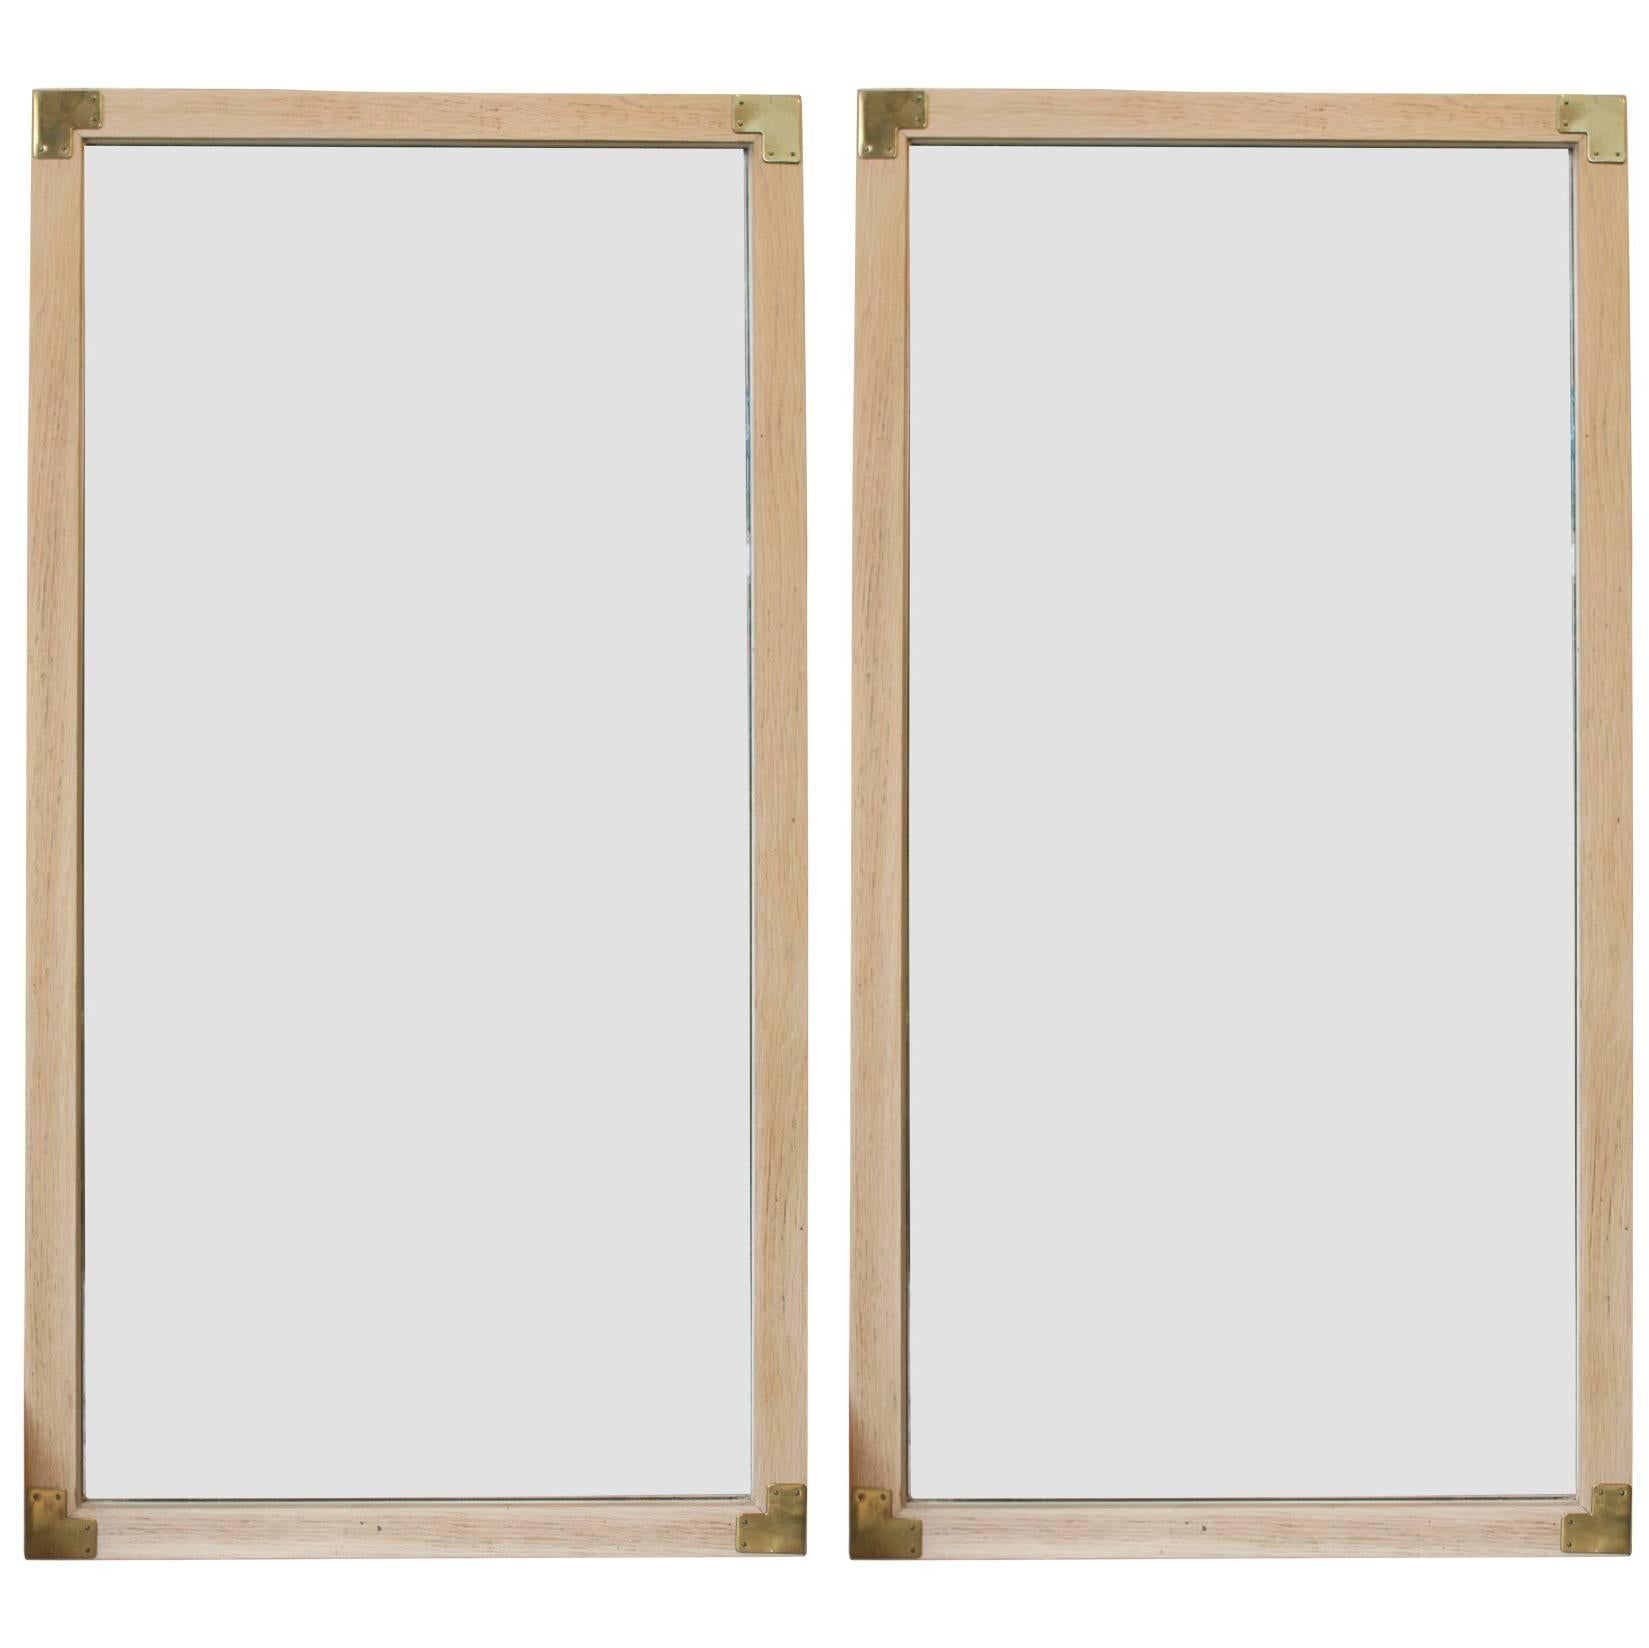 Pair of Modern Campaign Style Wall Mirrors with Brass Accents and Natural Wood